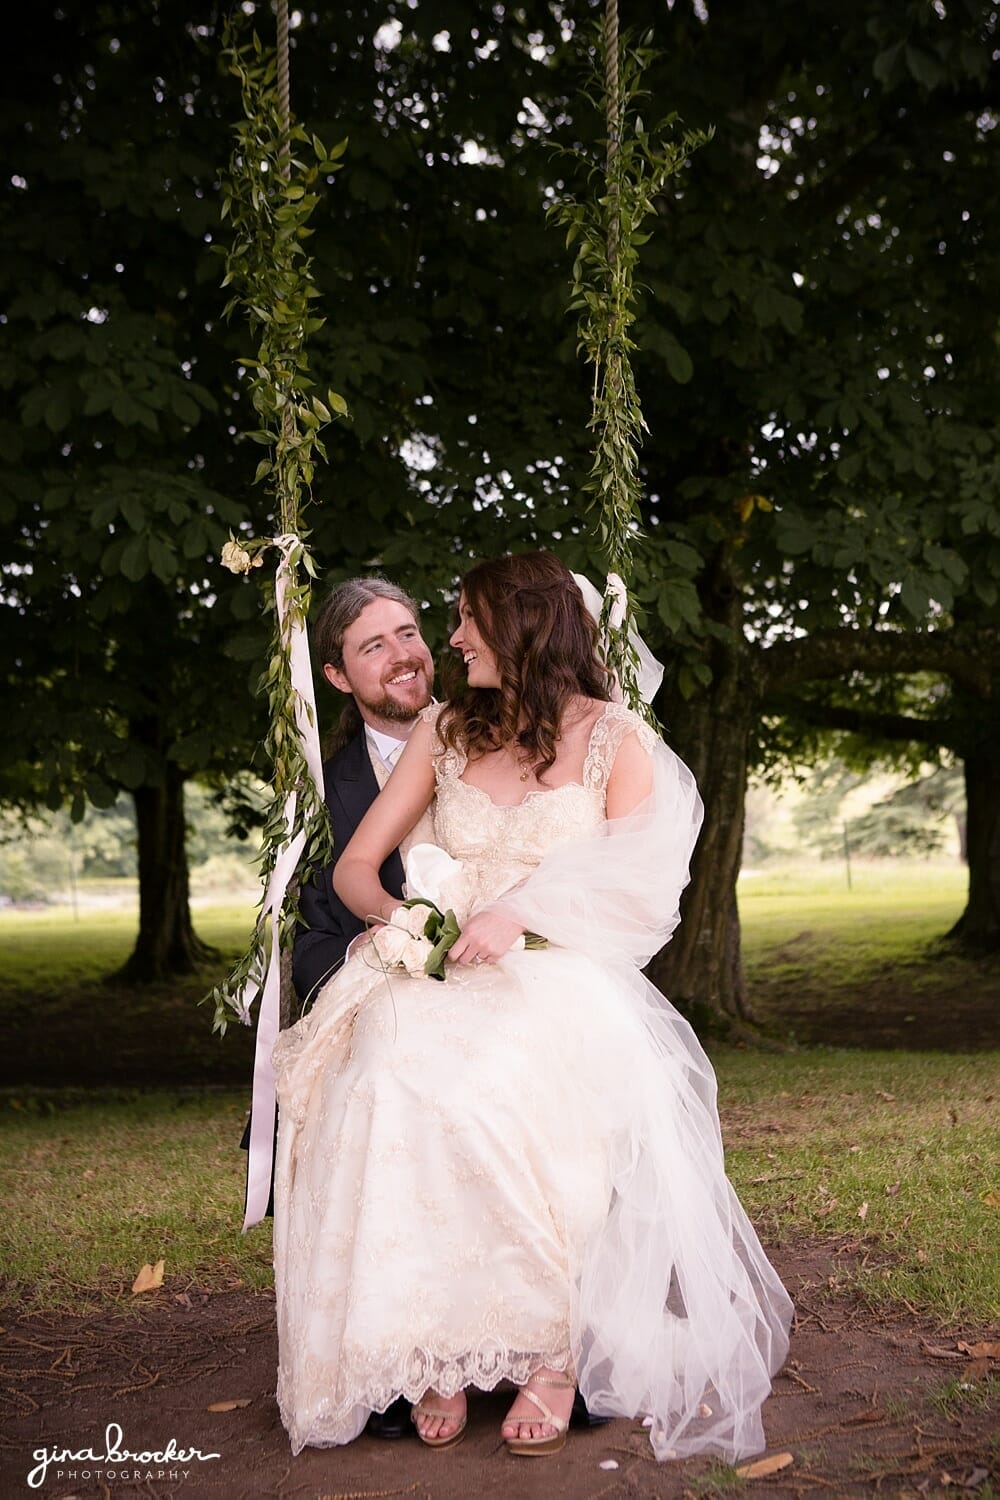 Bride and Groom cuddle on an ivy swing